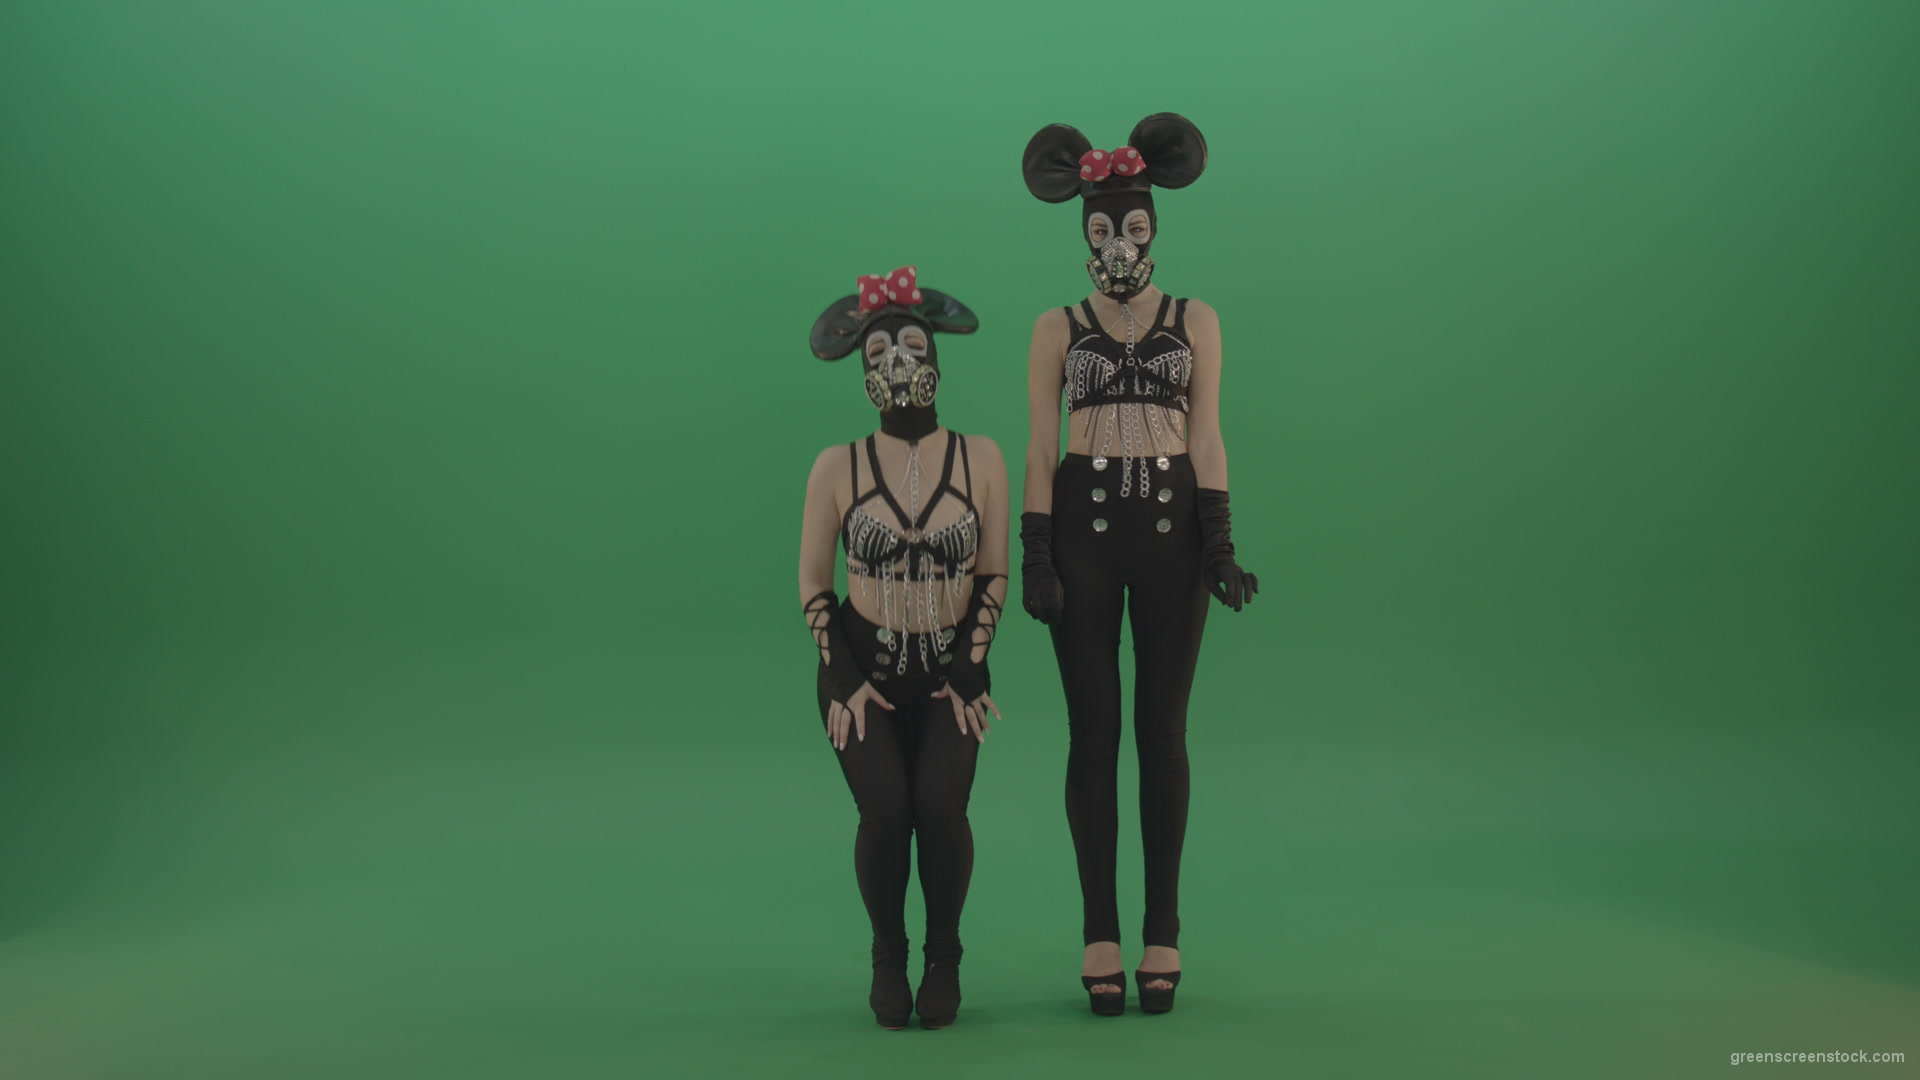 Two-girls-dressed-in-Mickey-Mouse-sit-squarelyon-green-screen_008 Green Screen Stock